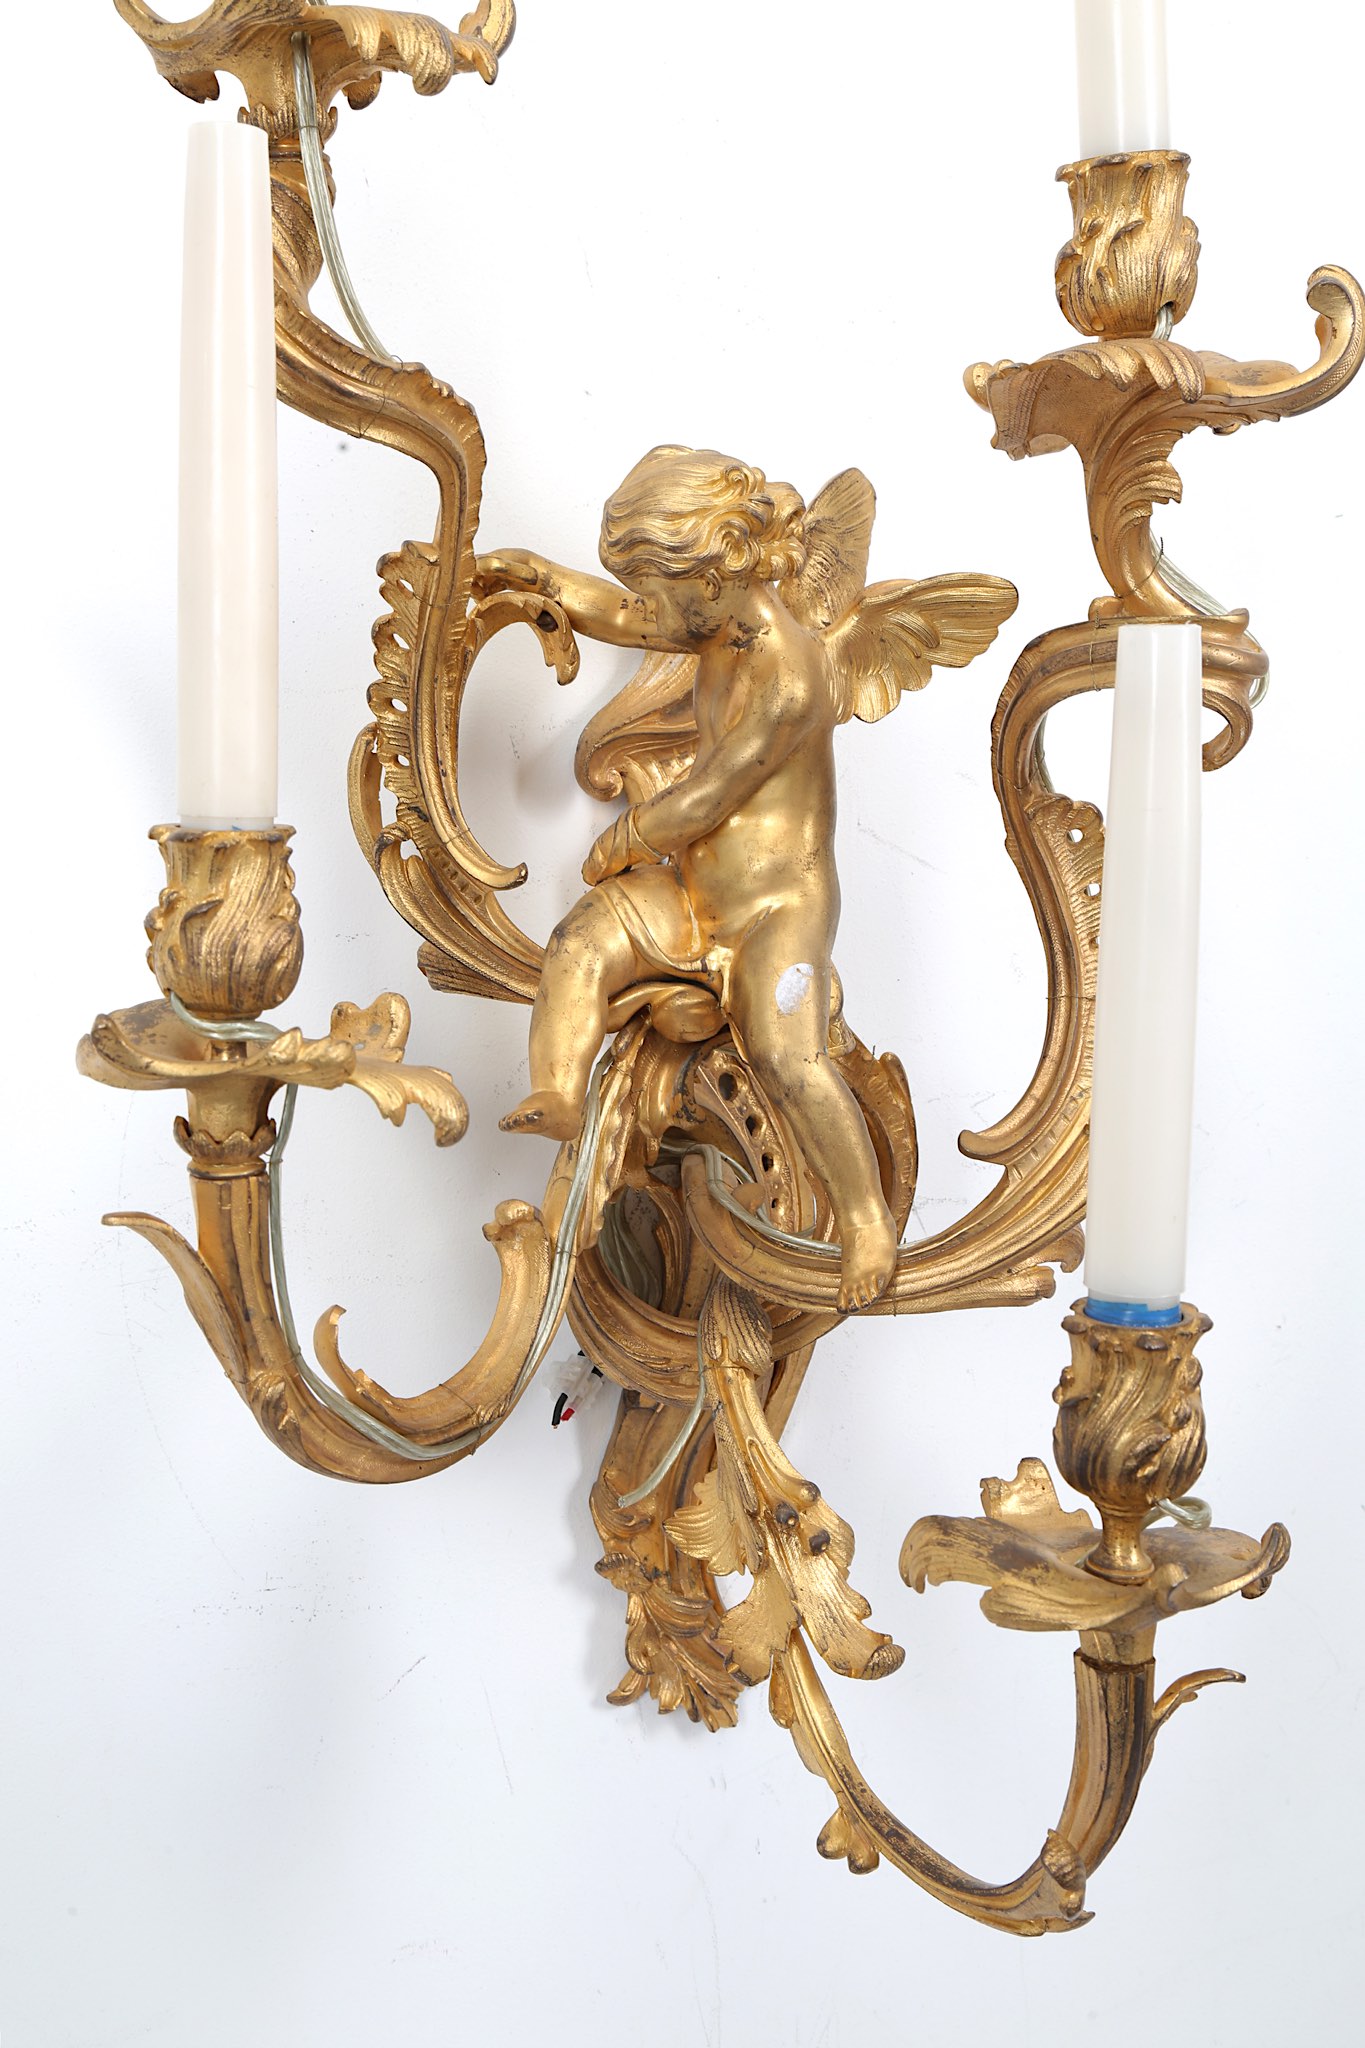 A LARGE AND IMPRESSIVE PAIR OF 19TH CENTURY FRENCH GILT BRONZE FIGURAL WALL LIGHTS IN THE ROCOCO - Image 2 of 7